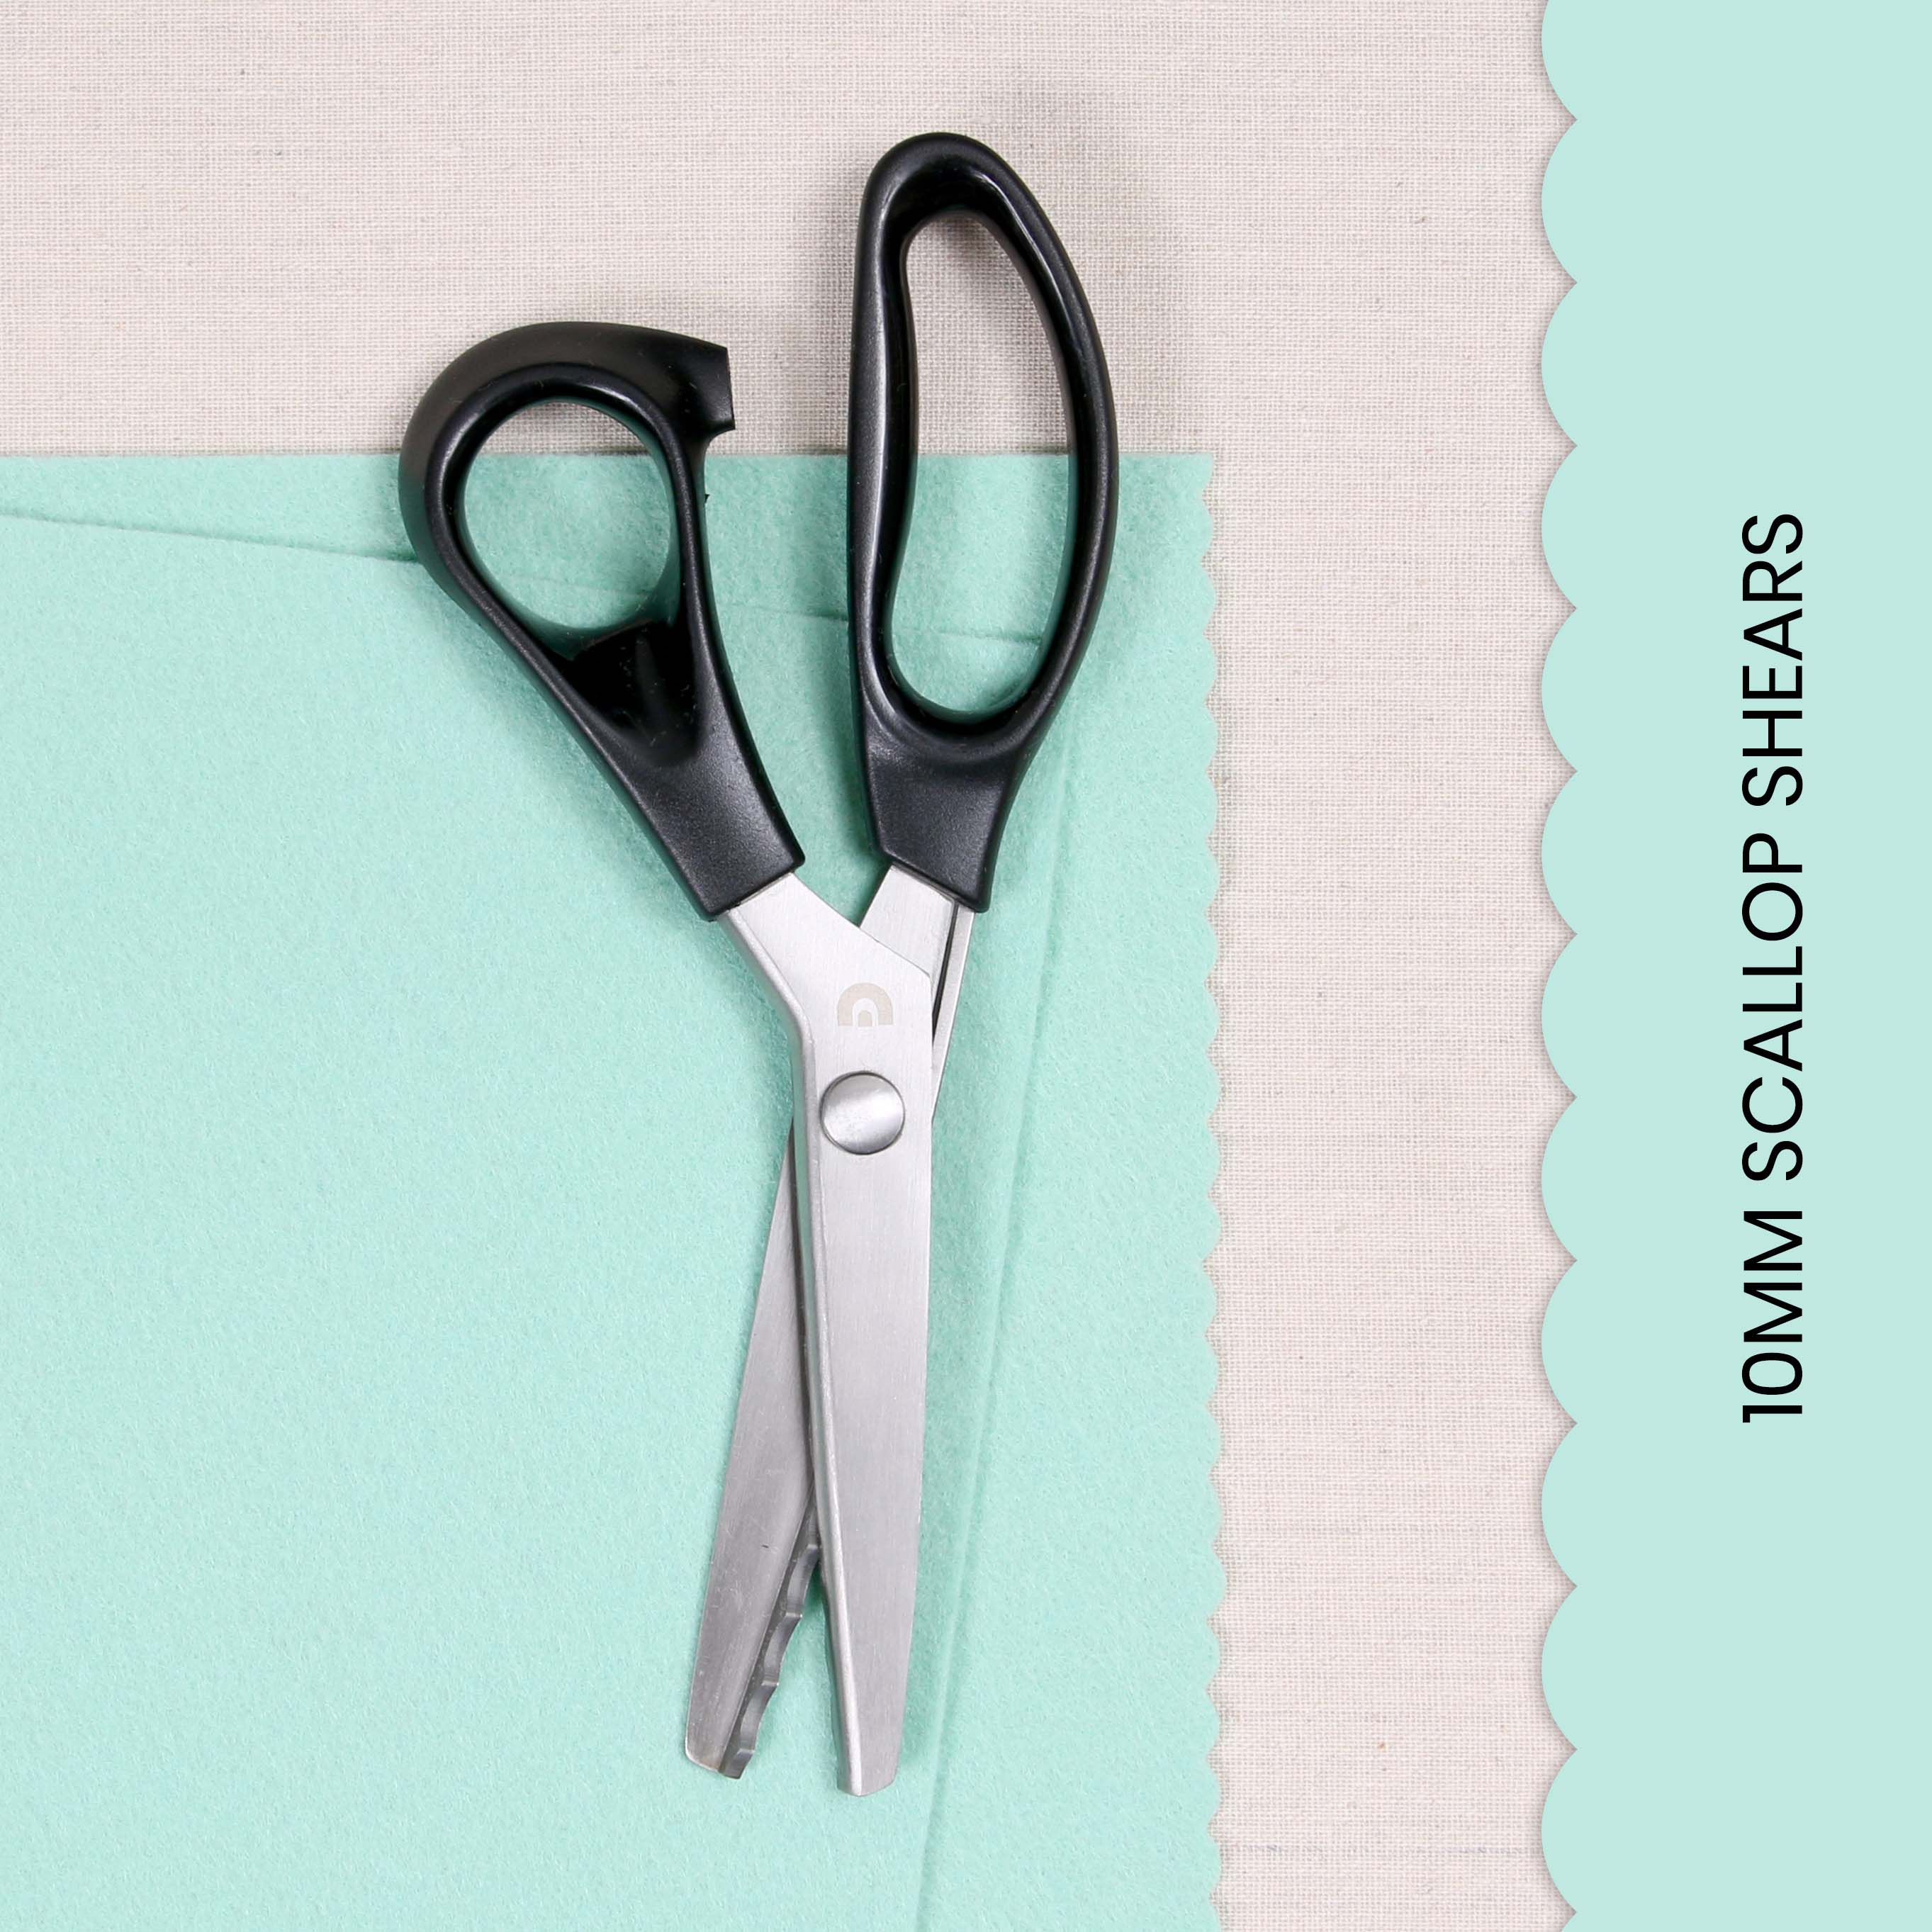 3/5/7/10MM Stainless Steel Pinking Shears Sewing Scissors